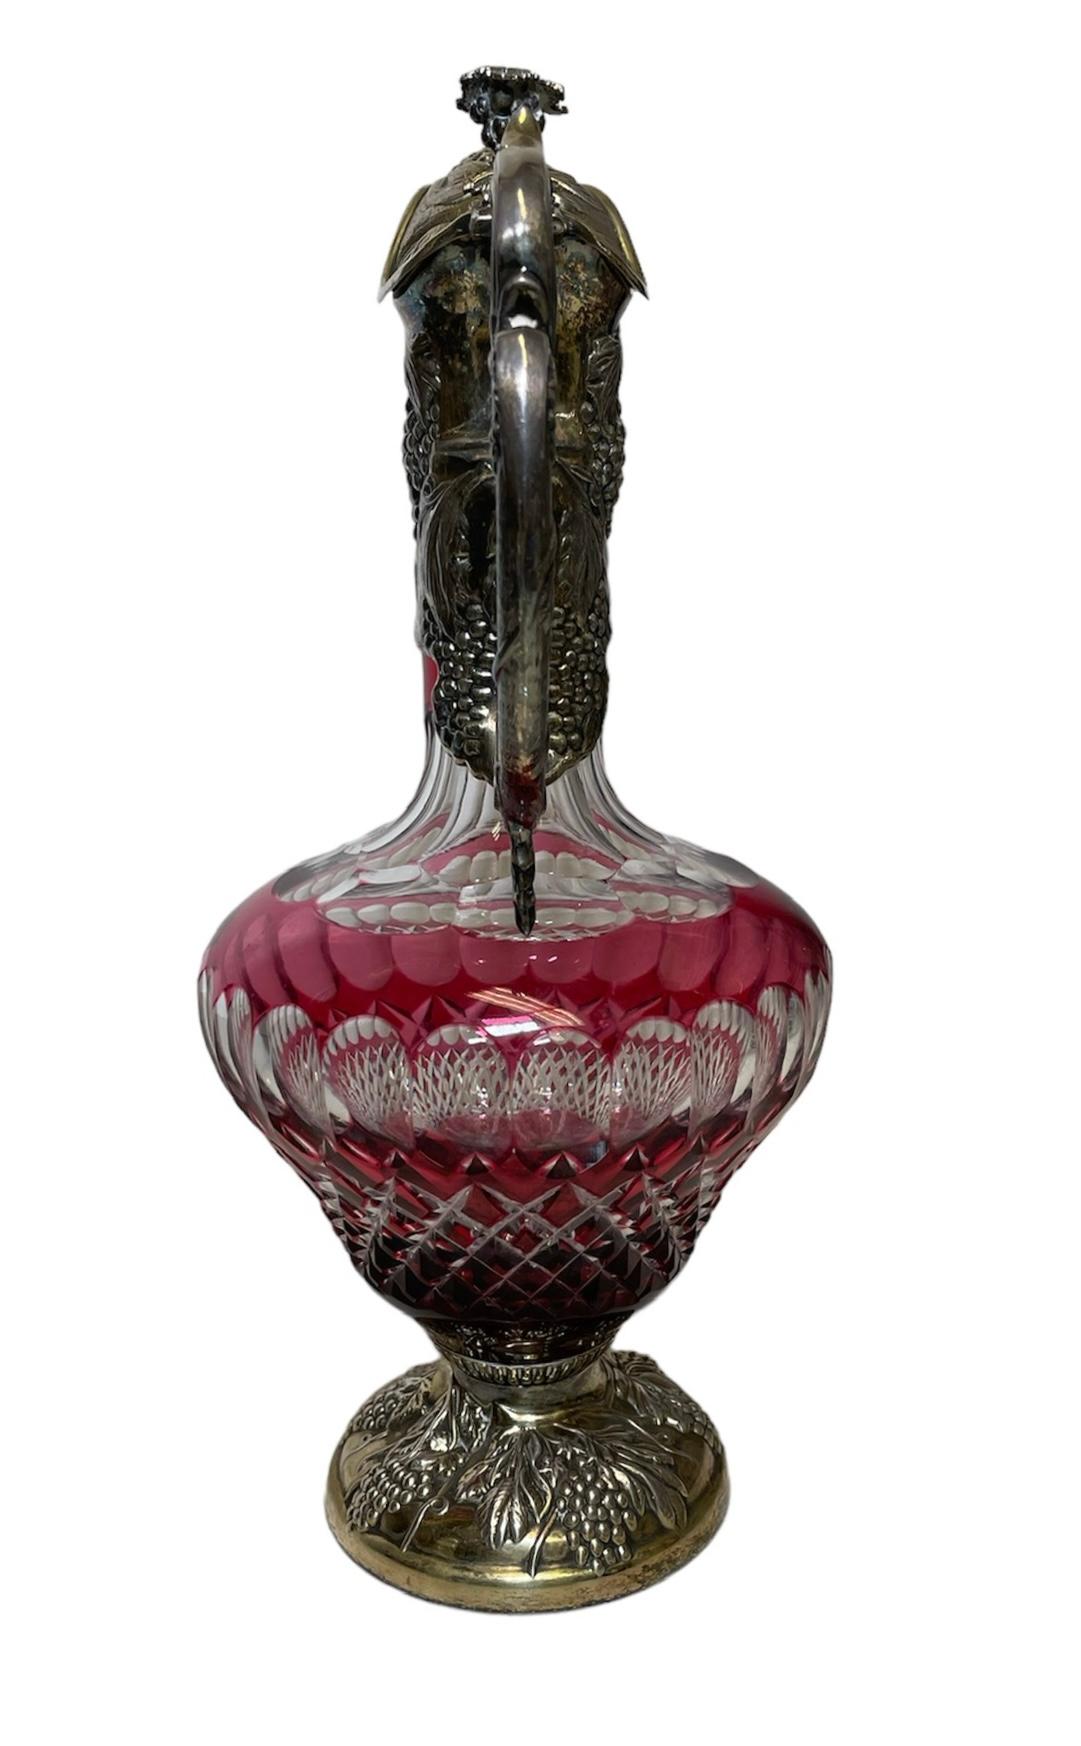 This is an English Electroplated Silver and Cut Crystal Claret, Wine Jug or Decanter. It depicts a red and clear crystal body adorned with a pattern of oval figures and a cluster of diamonds. The crystal body is mounted in electroplated silver at